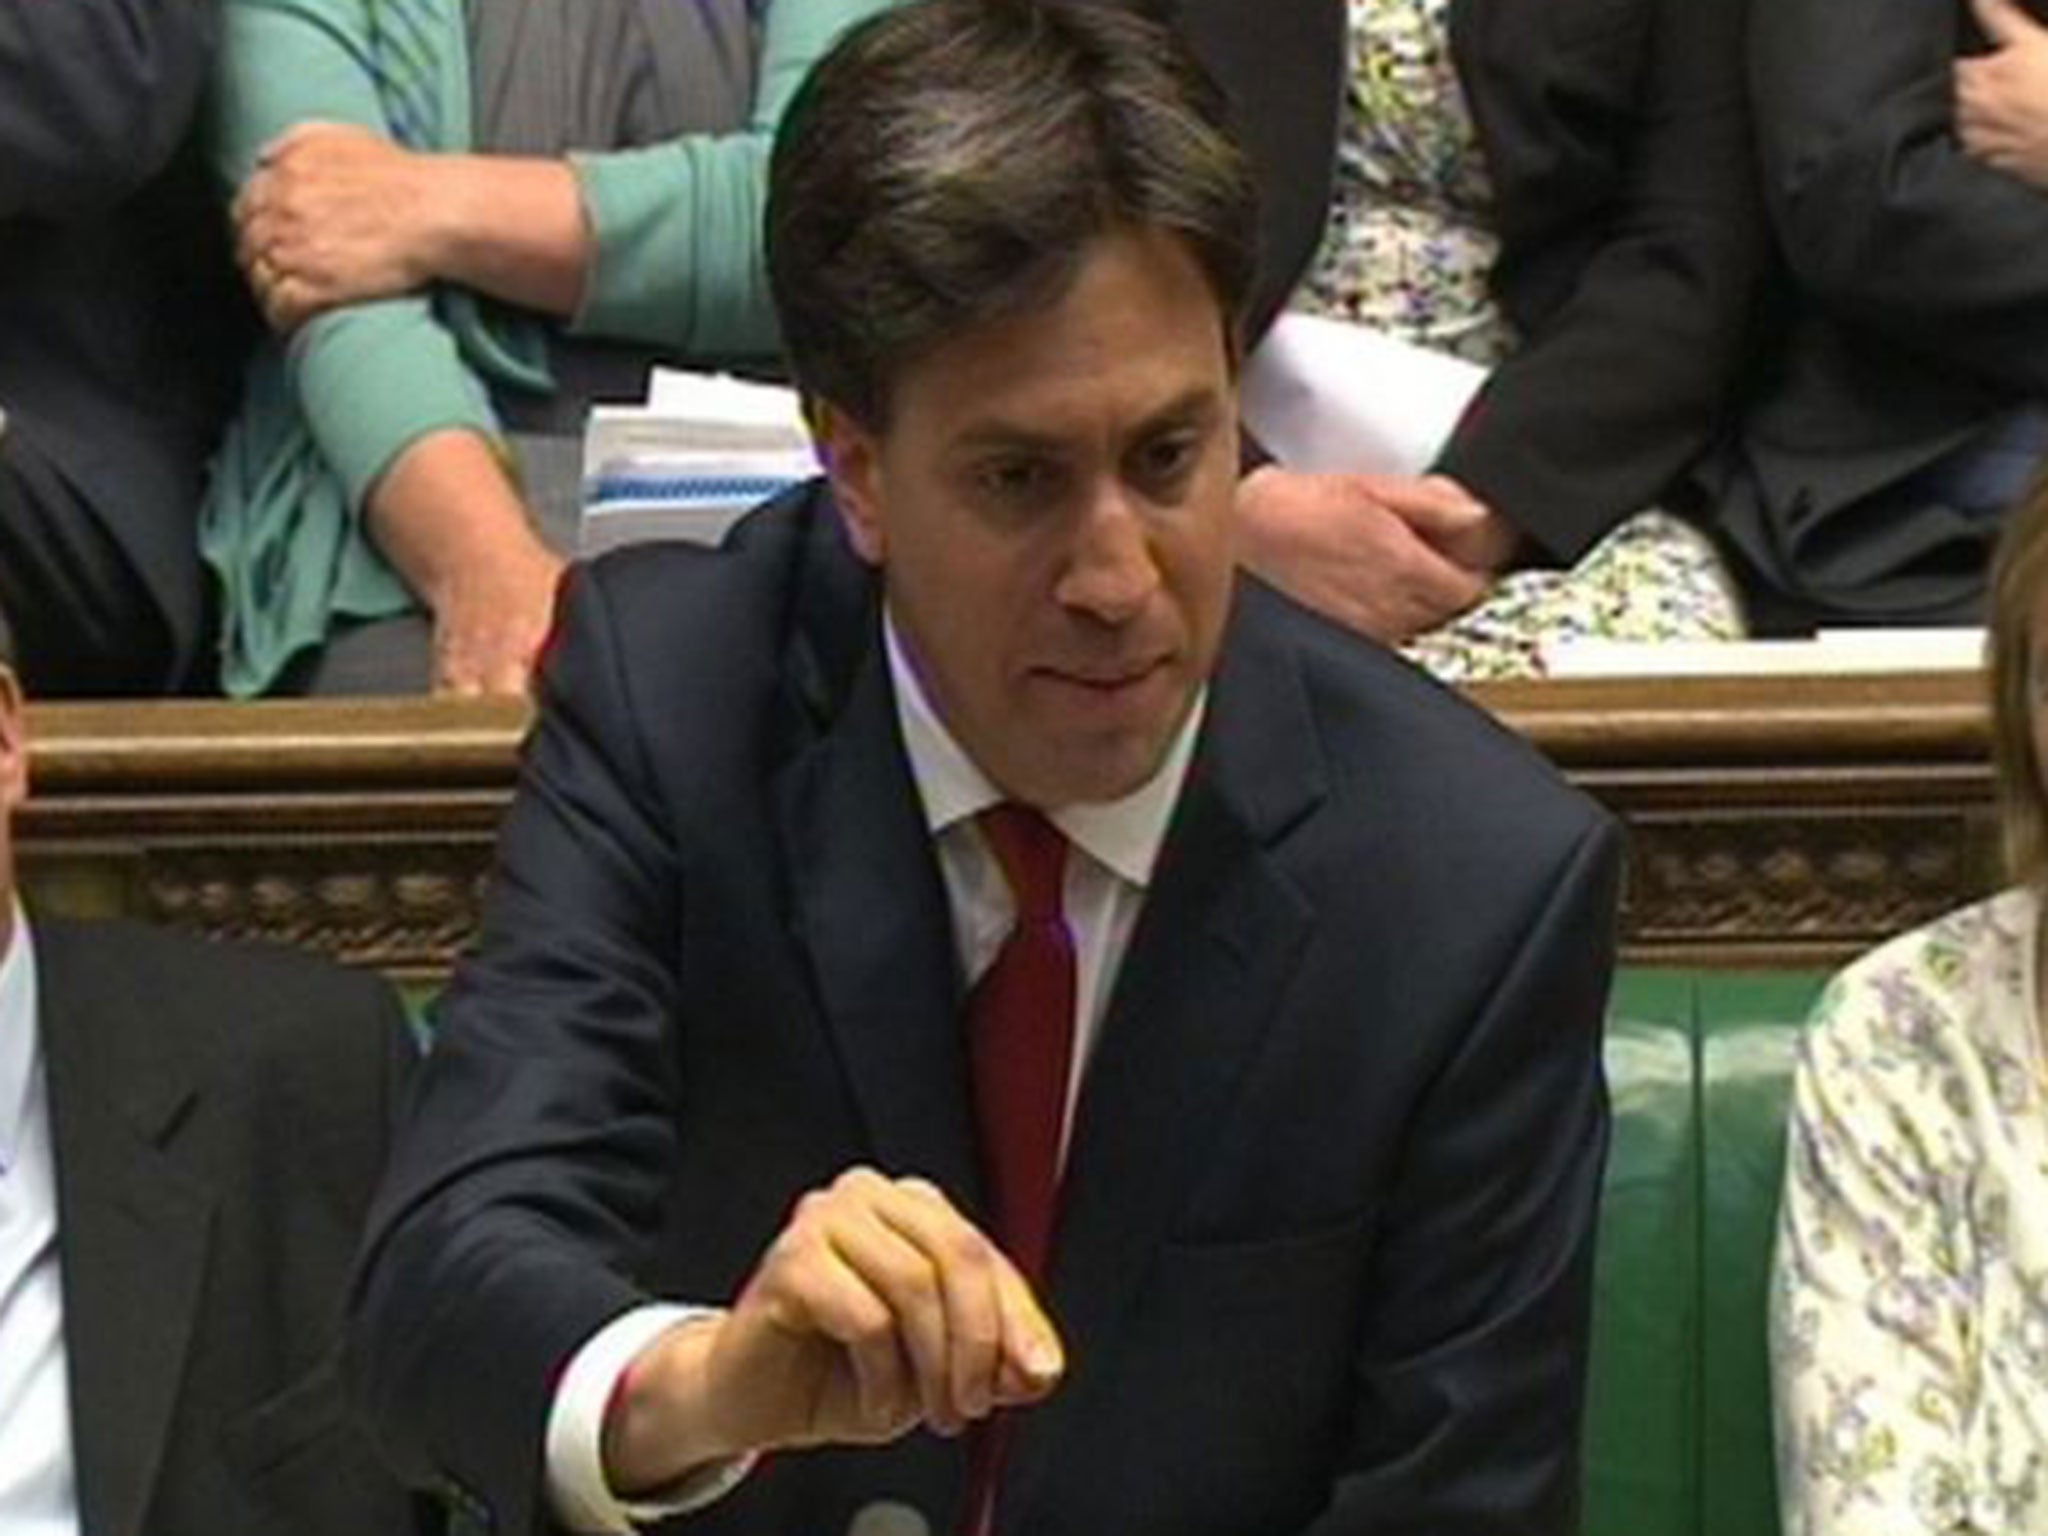 Mr Cameron dodged Mr Miliband's question in Parliament and accused him of going through “all the old questions that were answered by the Leveson Inquiry”